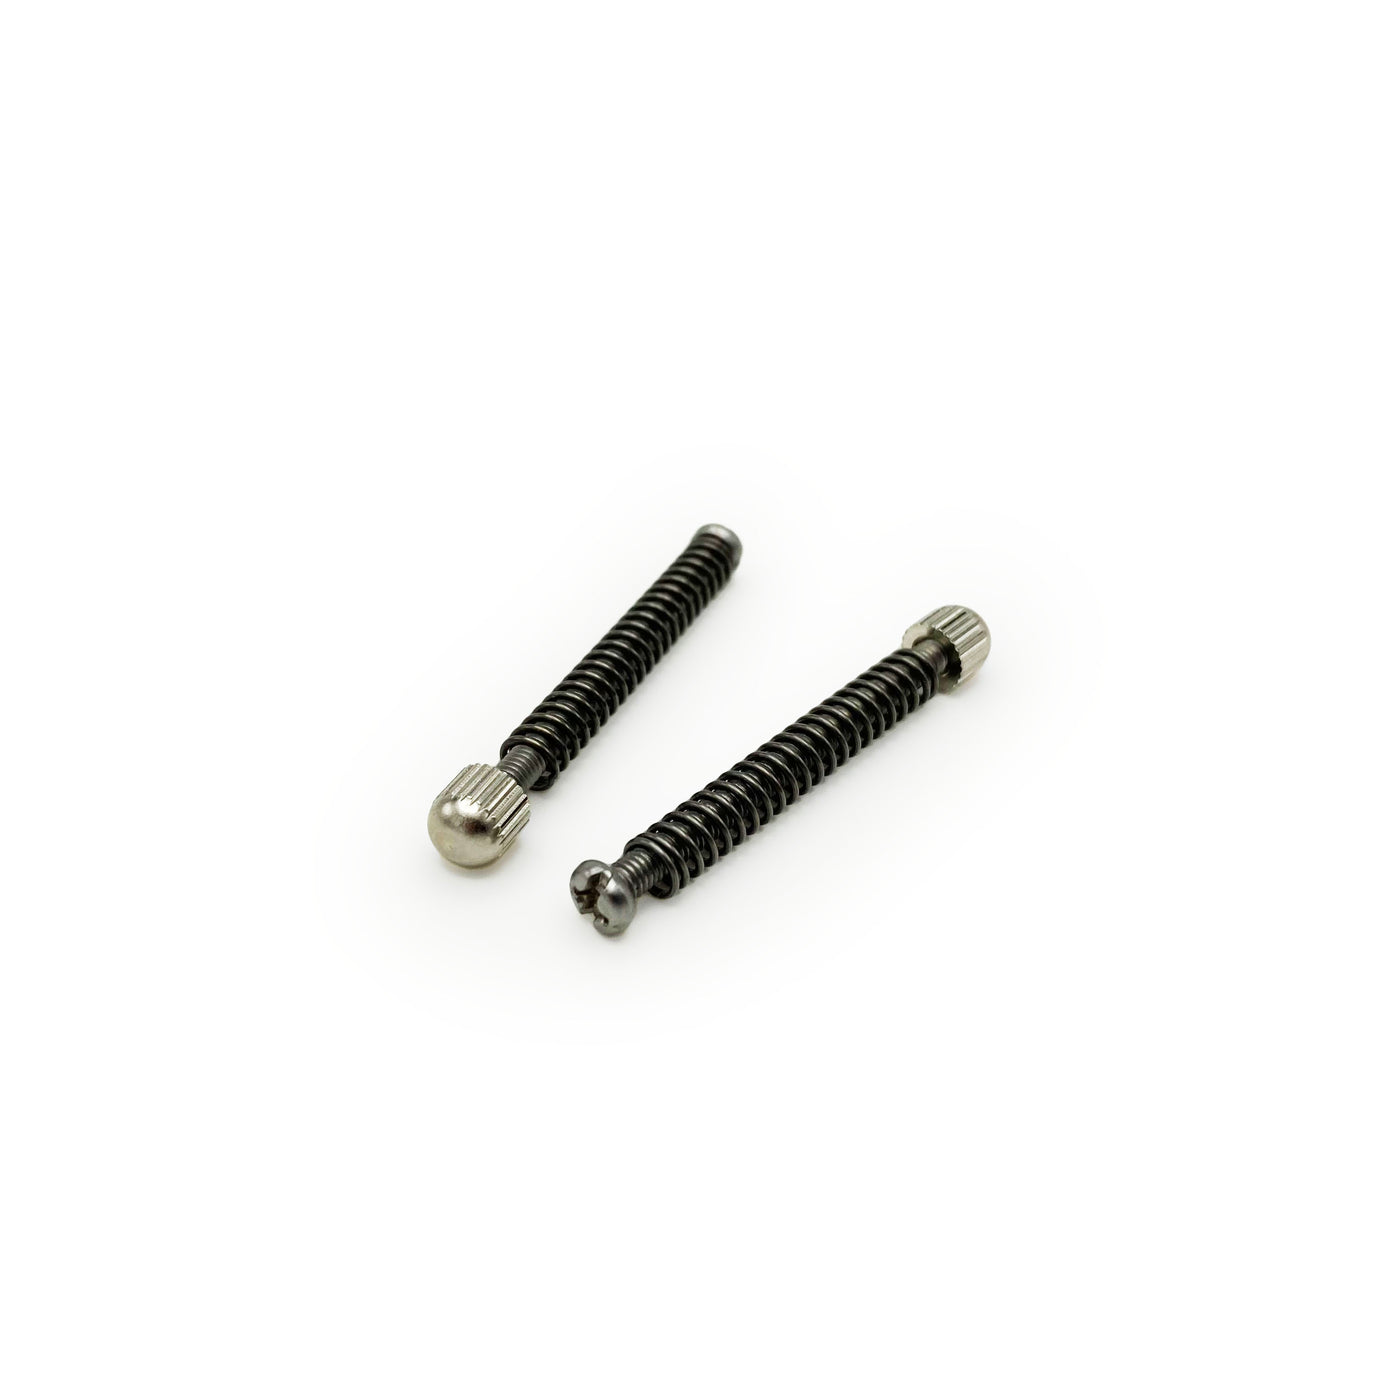 Dropout adjustment screws with springs and end-nuts - pair